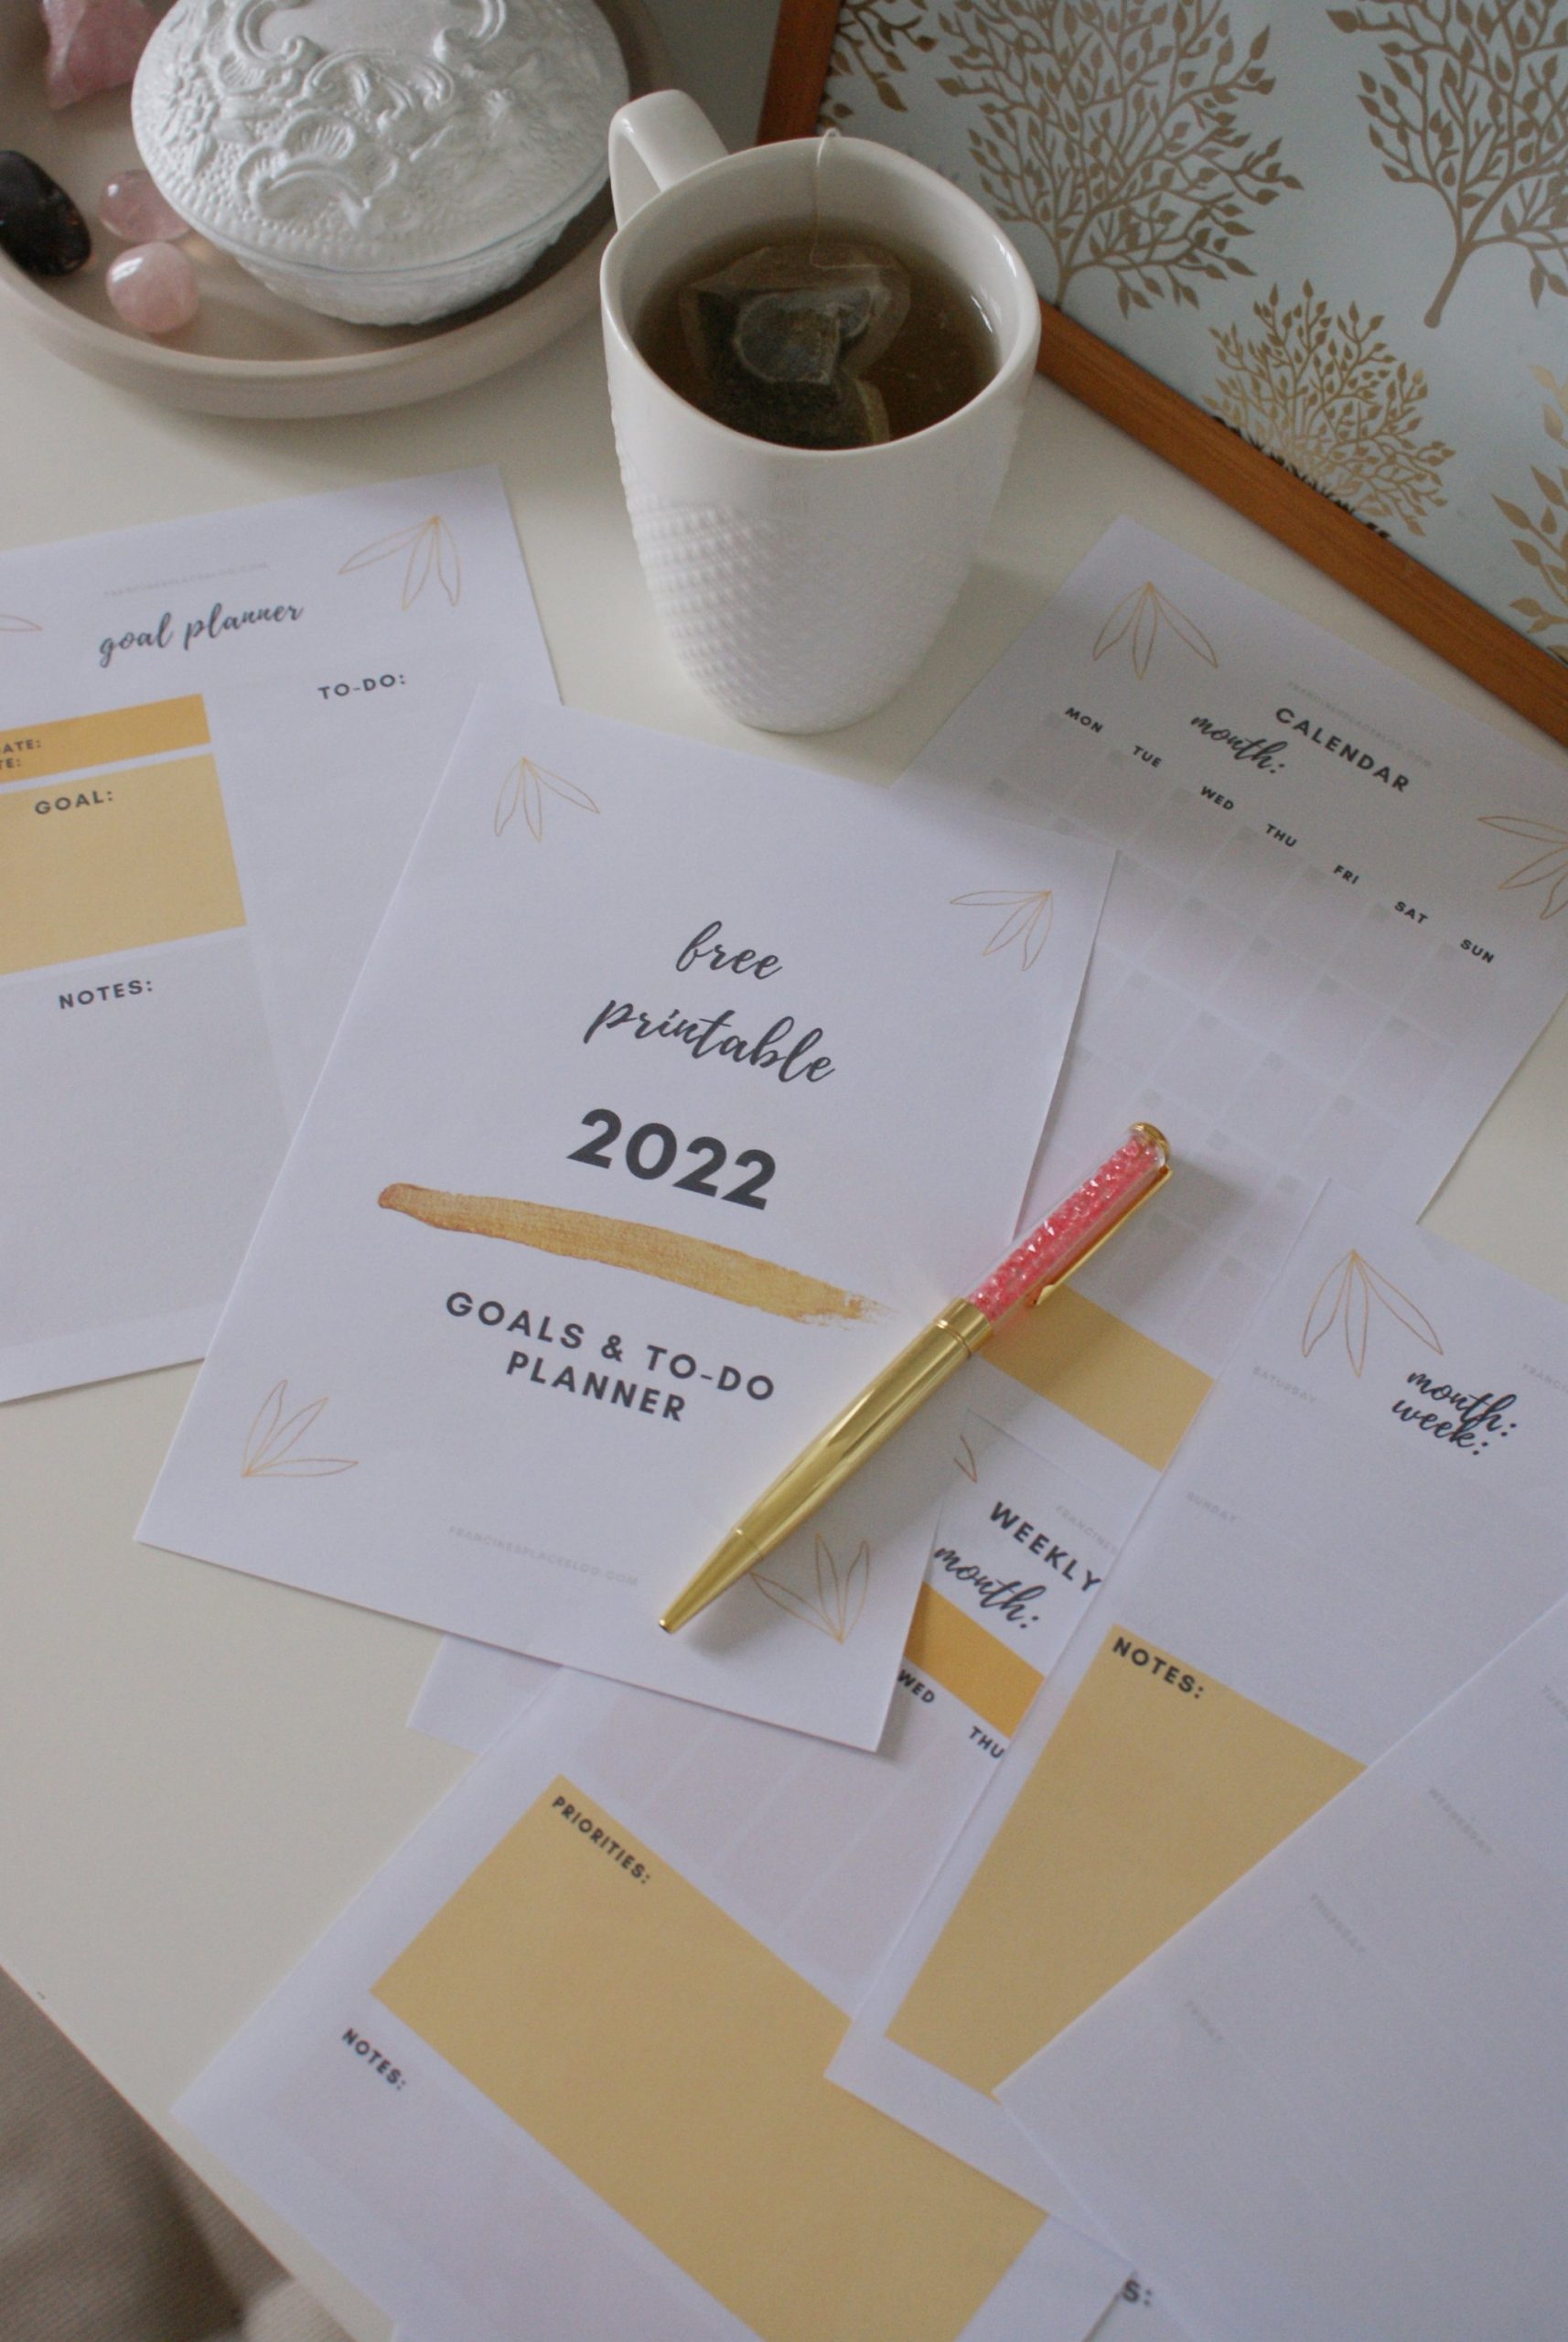 HOW TO CHANGE YOUR LIFE IN 2022 (WITH THE FREE PRINTABLE MONTHLY & WEEKLY GOAL PLANNER)